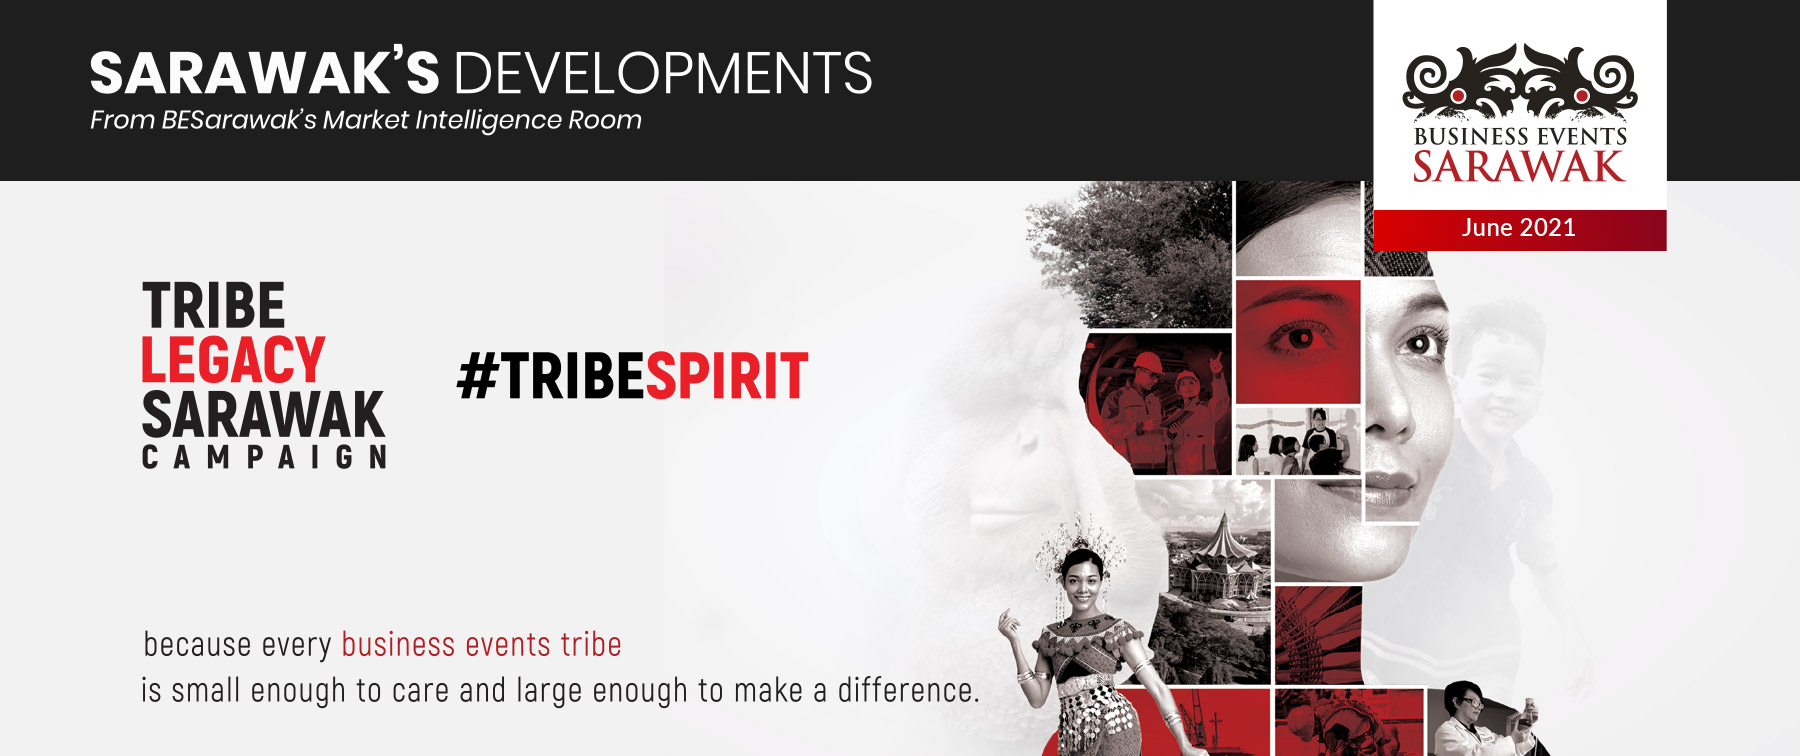 Tribe.Legacy Sarawak - because every business events tribe is small enough to care and large enough to make a difference.